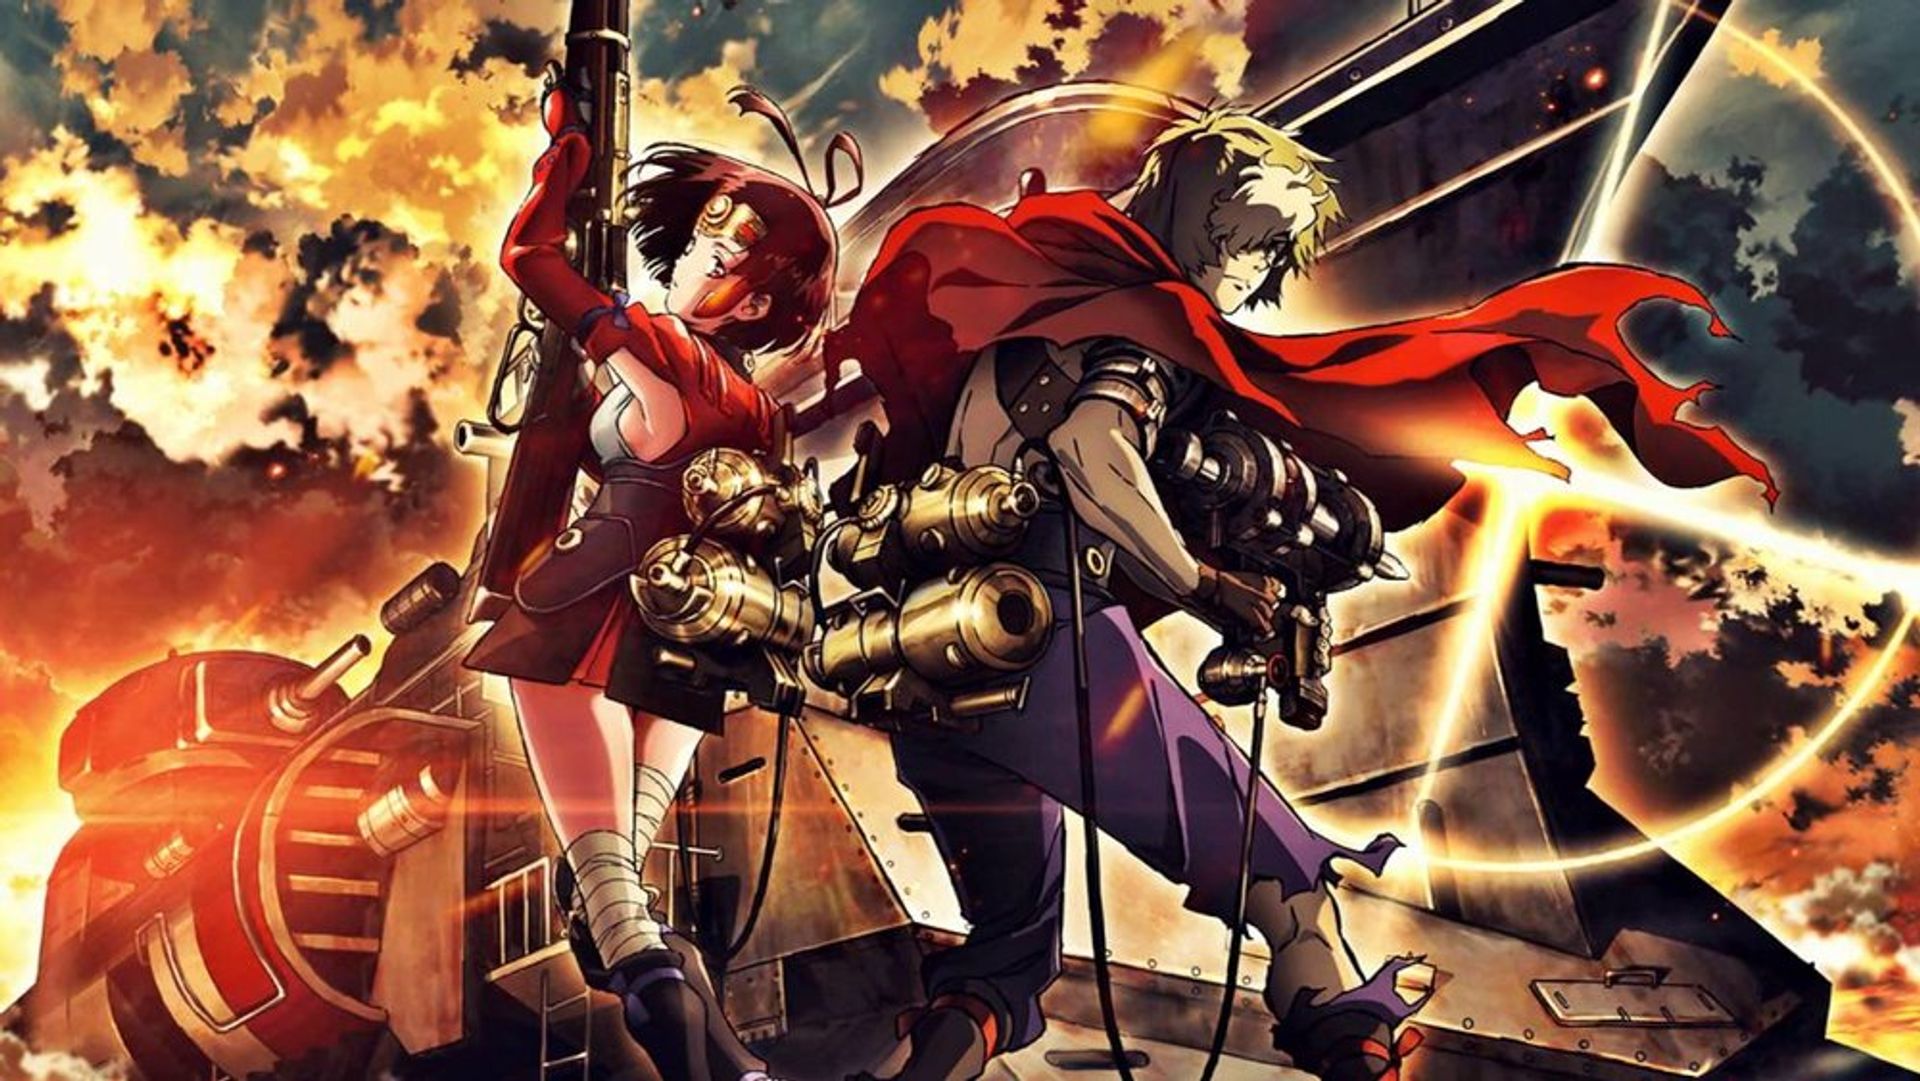 KABANERI OF THE IRON FORTRESS : THE BATTLE OF UNATO - COMPLETE ANIME MOVIE  DVD BOX SET : : Movies & TV